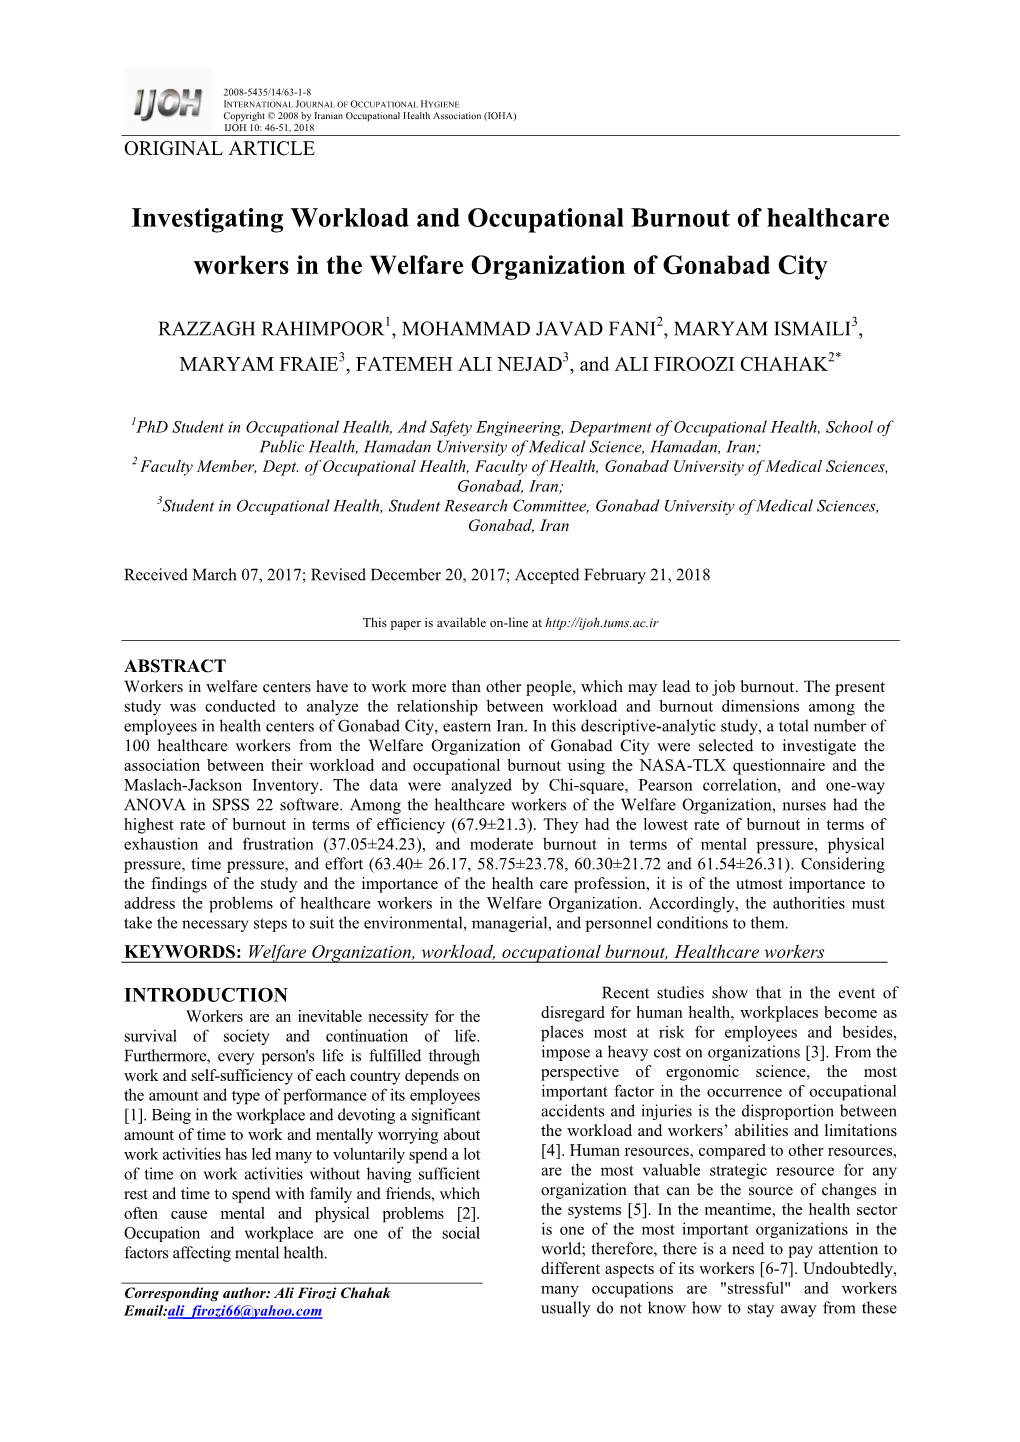 Investigating Workload and Occupational Burnout of Healthcare Workers in the Welfare Organization of Gonabad City